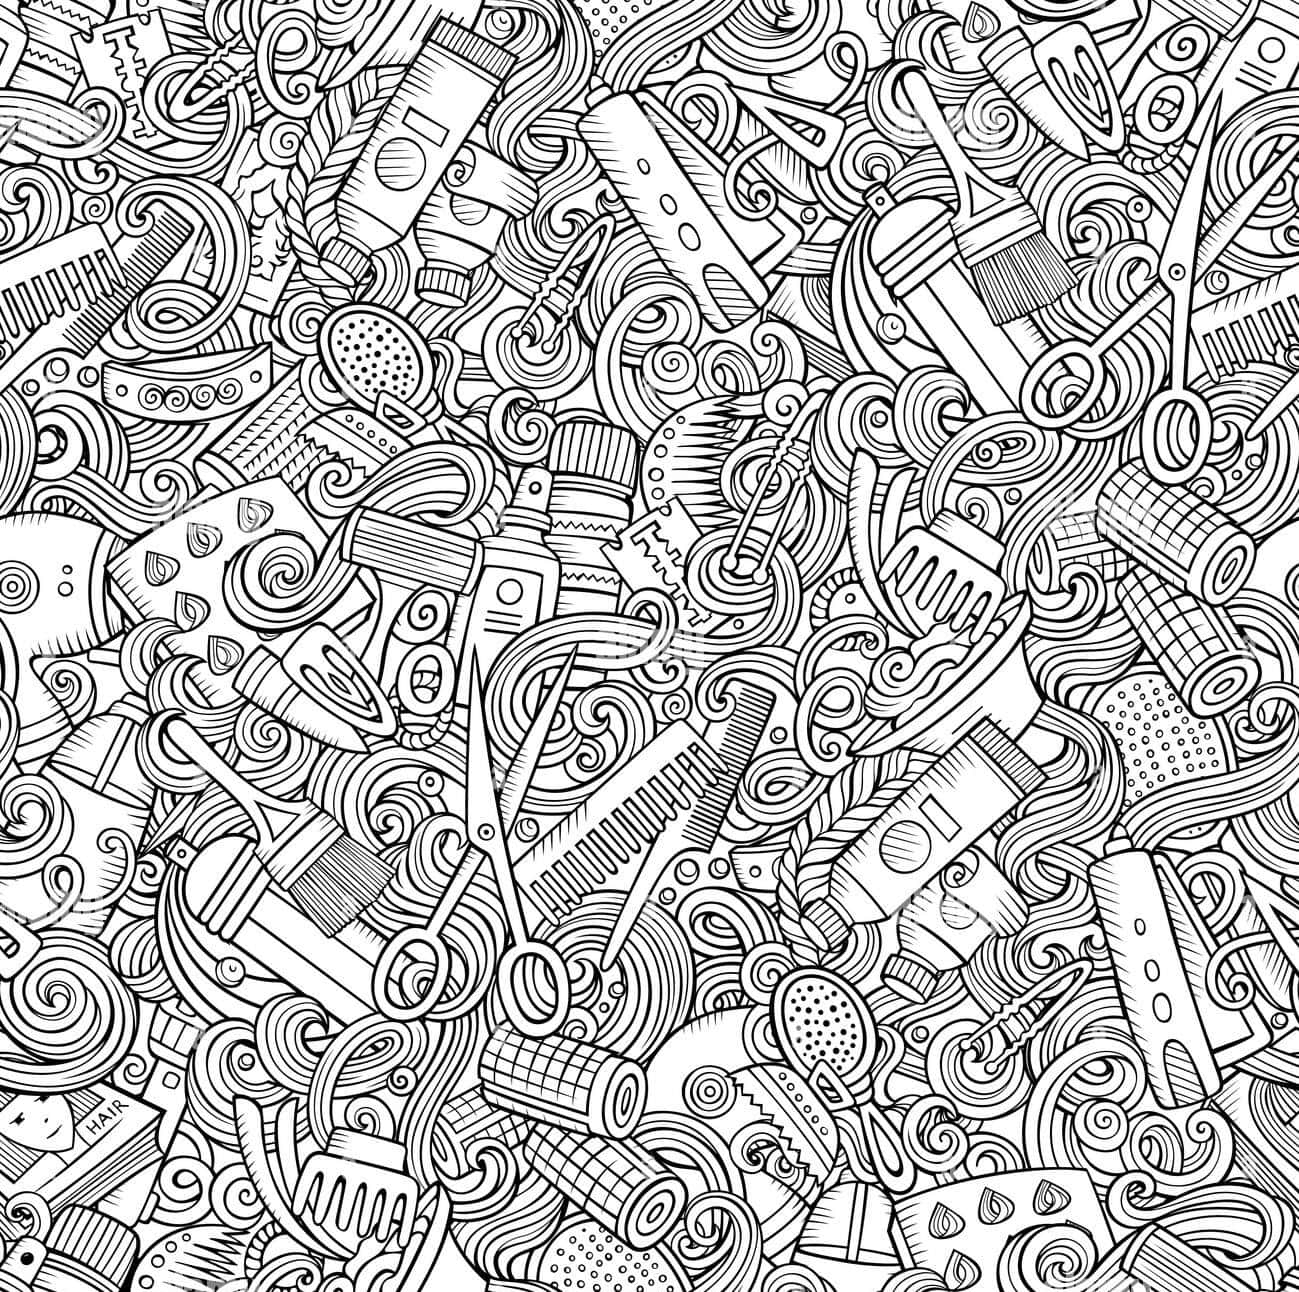 A Black And White Doodle Background With Many Different Items